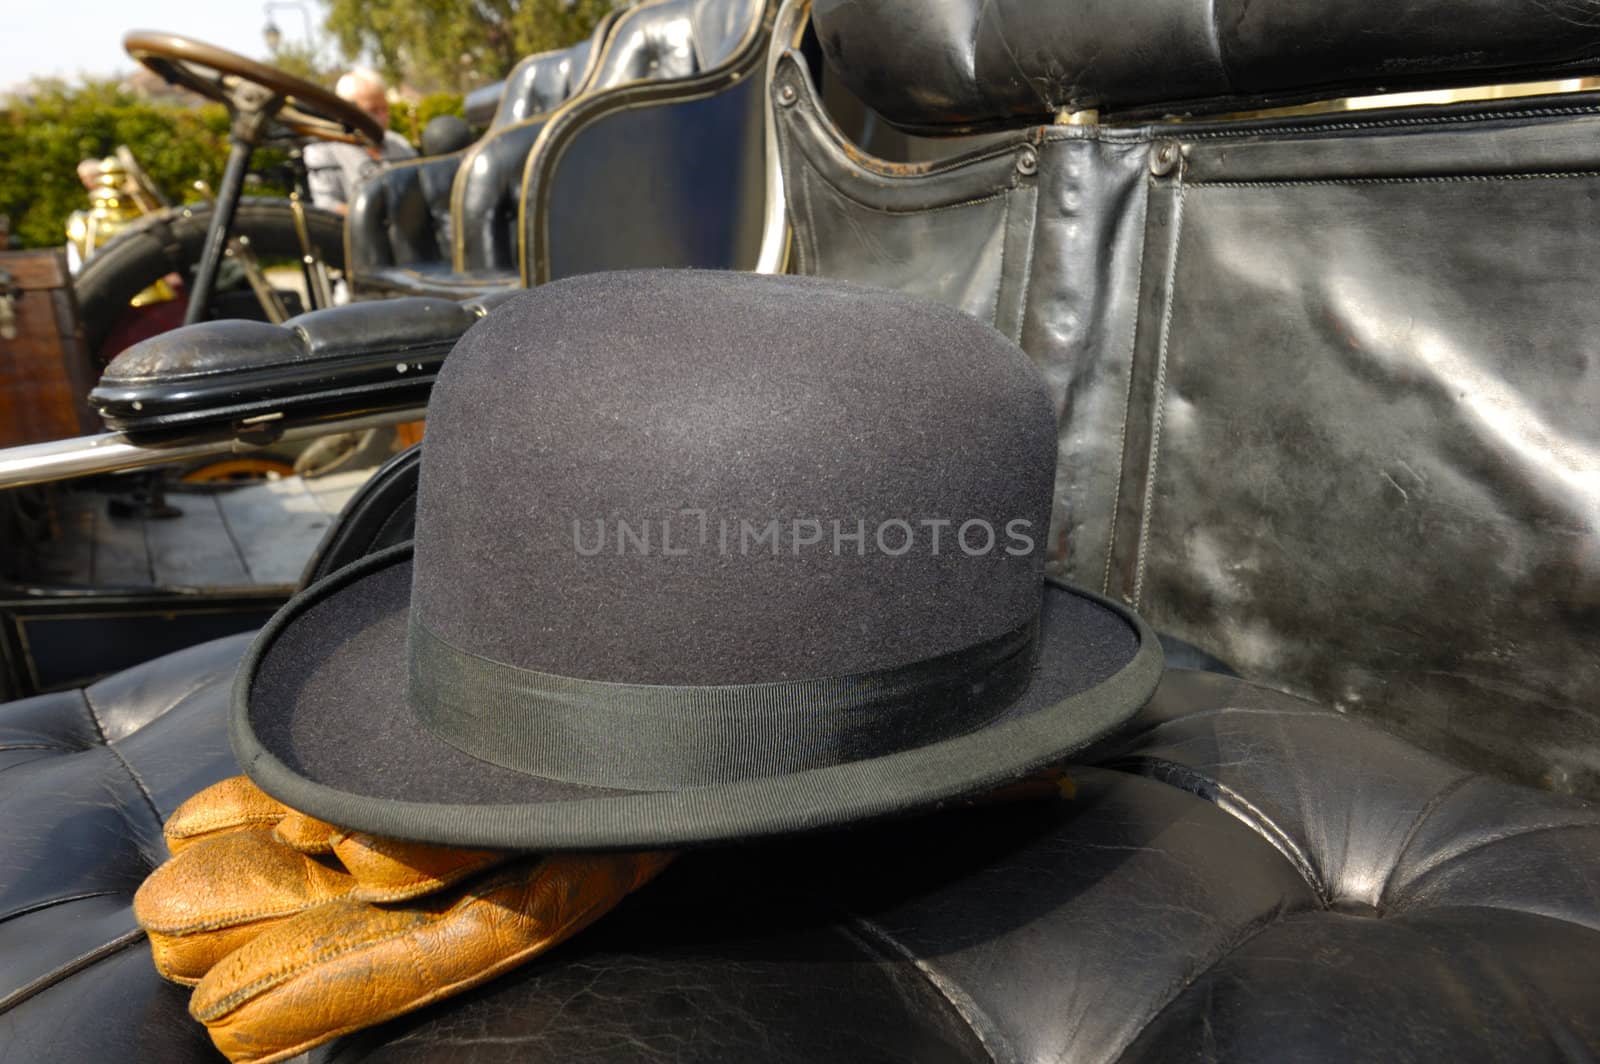 The black leather seat of a vintage motor-car with the driver's bowler hat and brown leather gloves placed carefully on it. Other vintage cars, lined up, can be seen in the background.